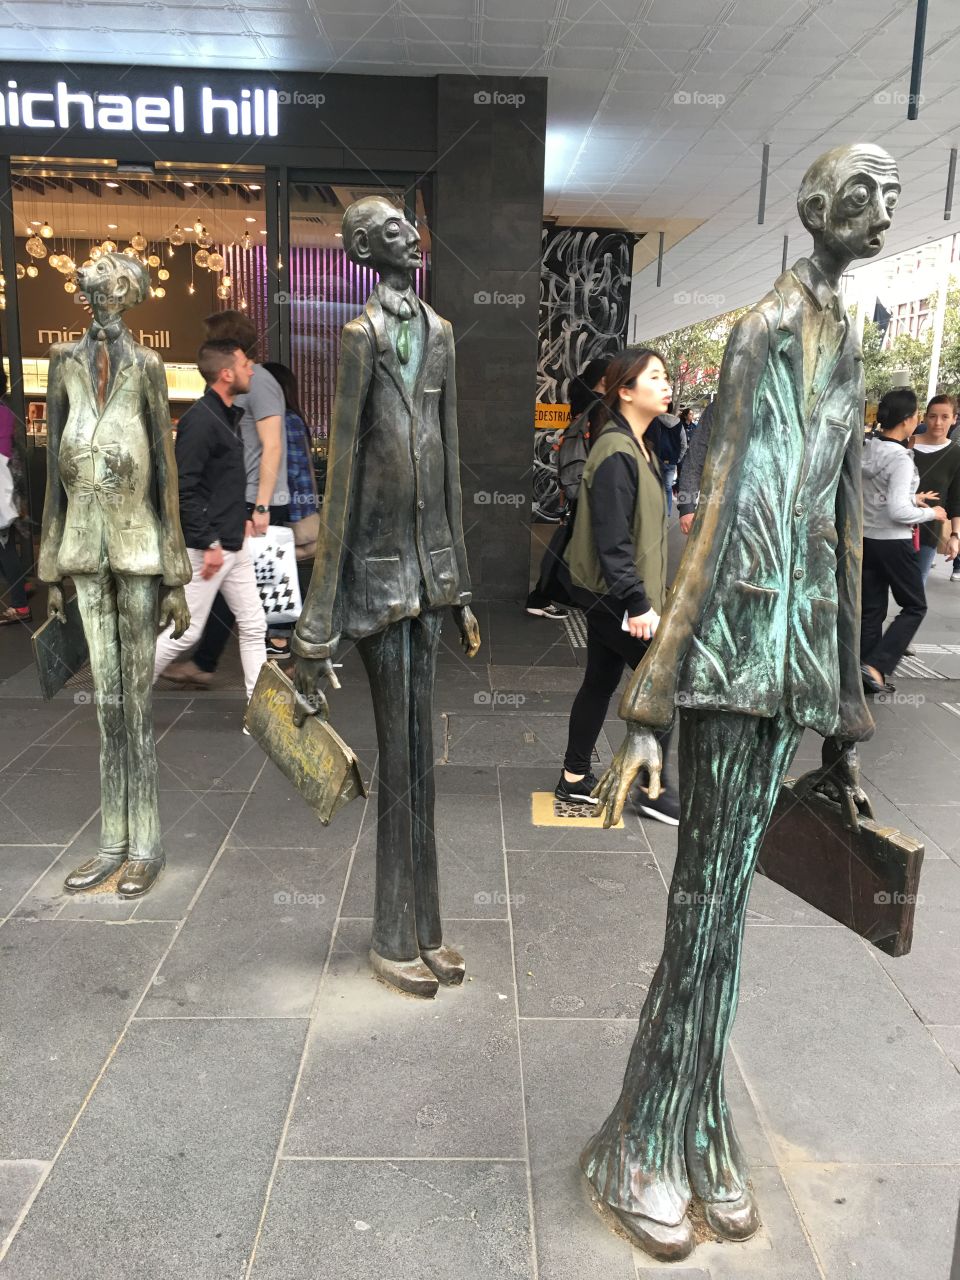 Statues on Bourke St Melbourne Australia. This street is lined with boutique and high end stores along with street performers. We heard some fabulous musicians who deserve to be signed by a label. 